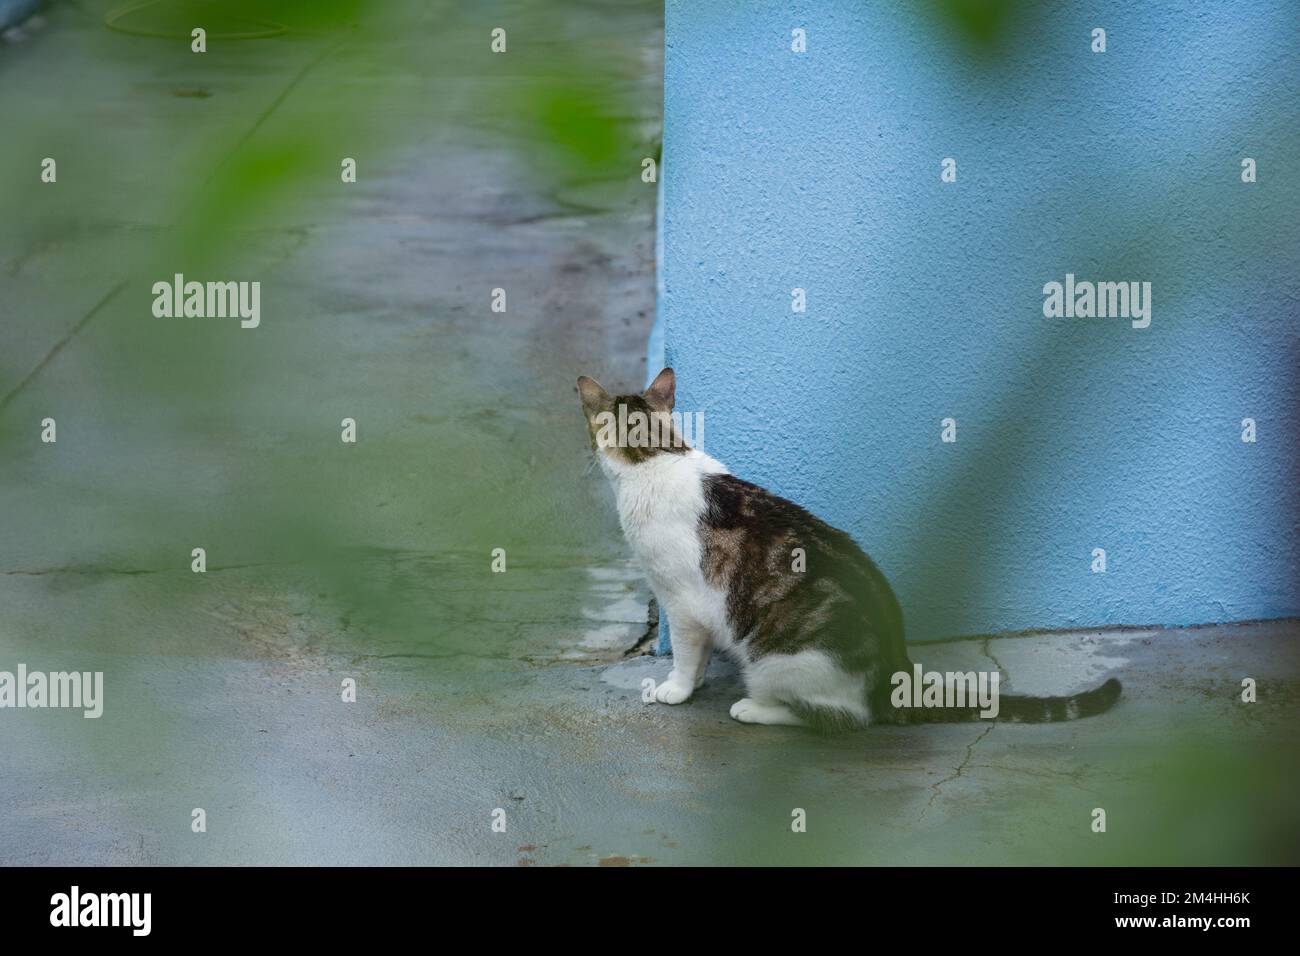 Goiania, Goiás, Brazil – December 20, 2022: A tabby cat sitting on the concrete floor, waiting behind the blue wall, seen through the leaves of a tree Stock Photo